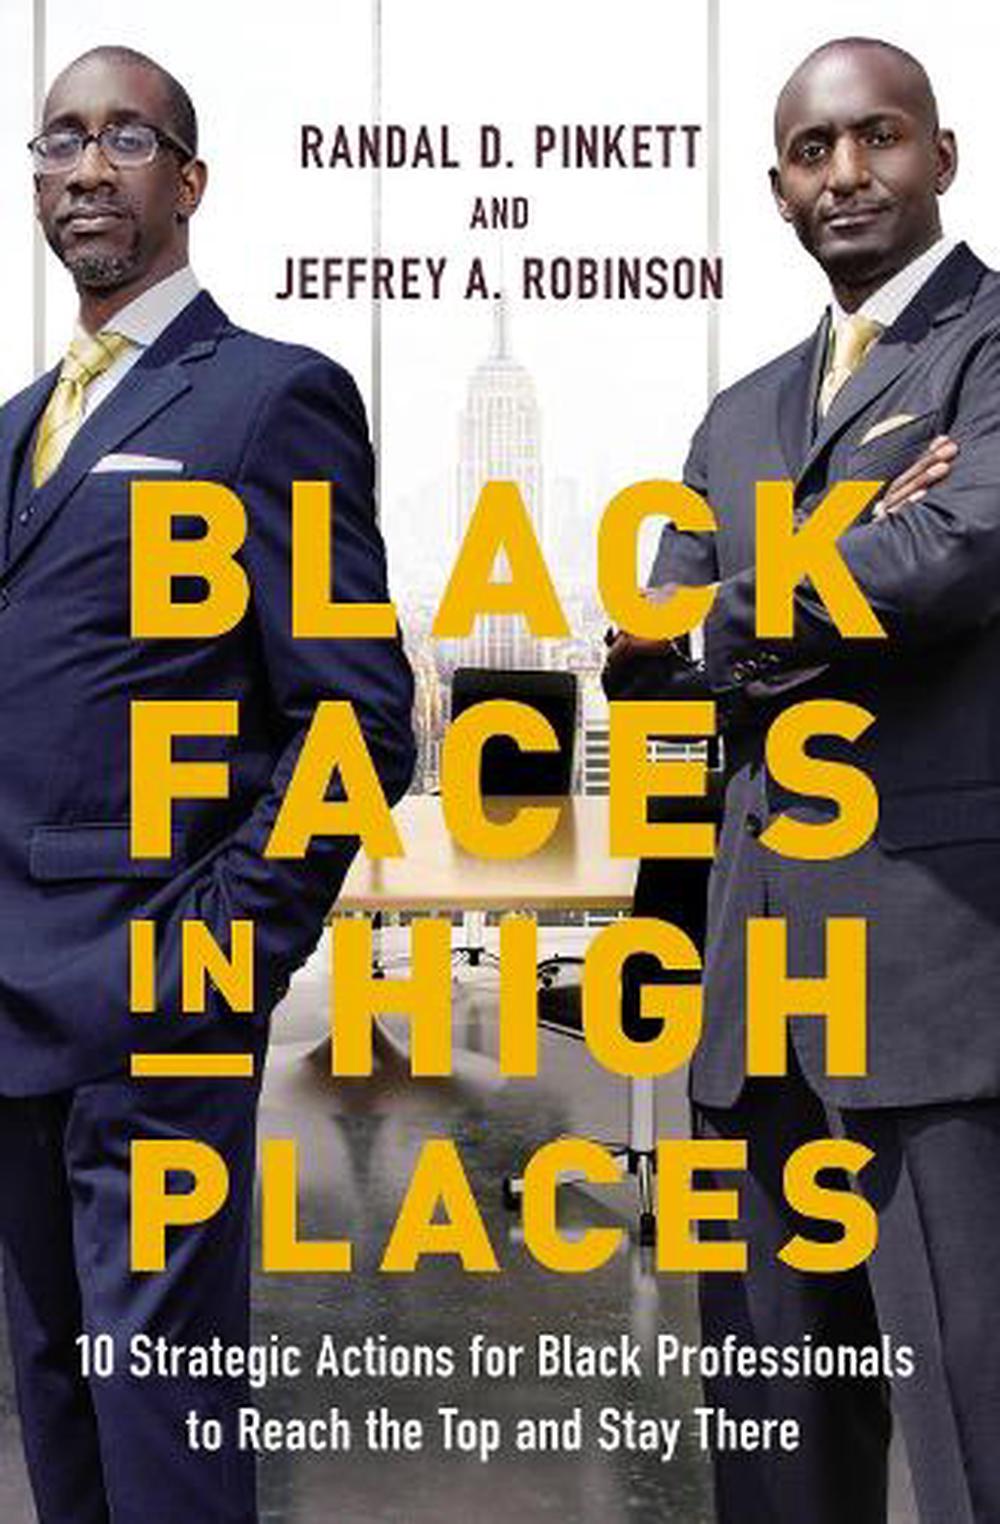 Black Faces in High Places by Randal D.Pinkett